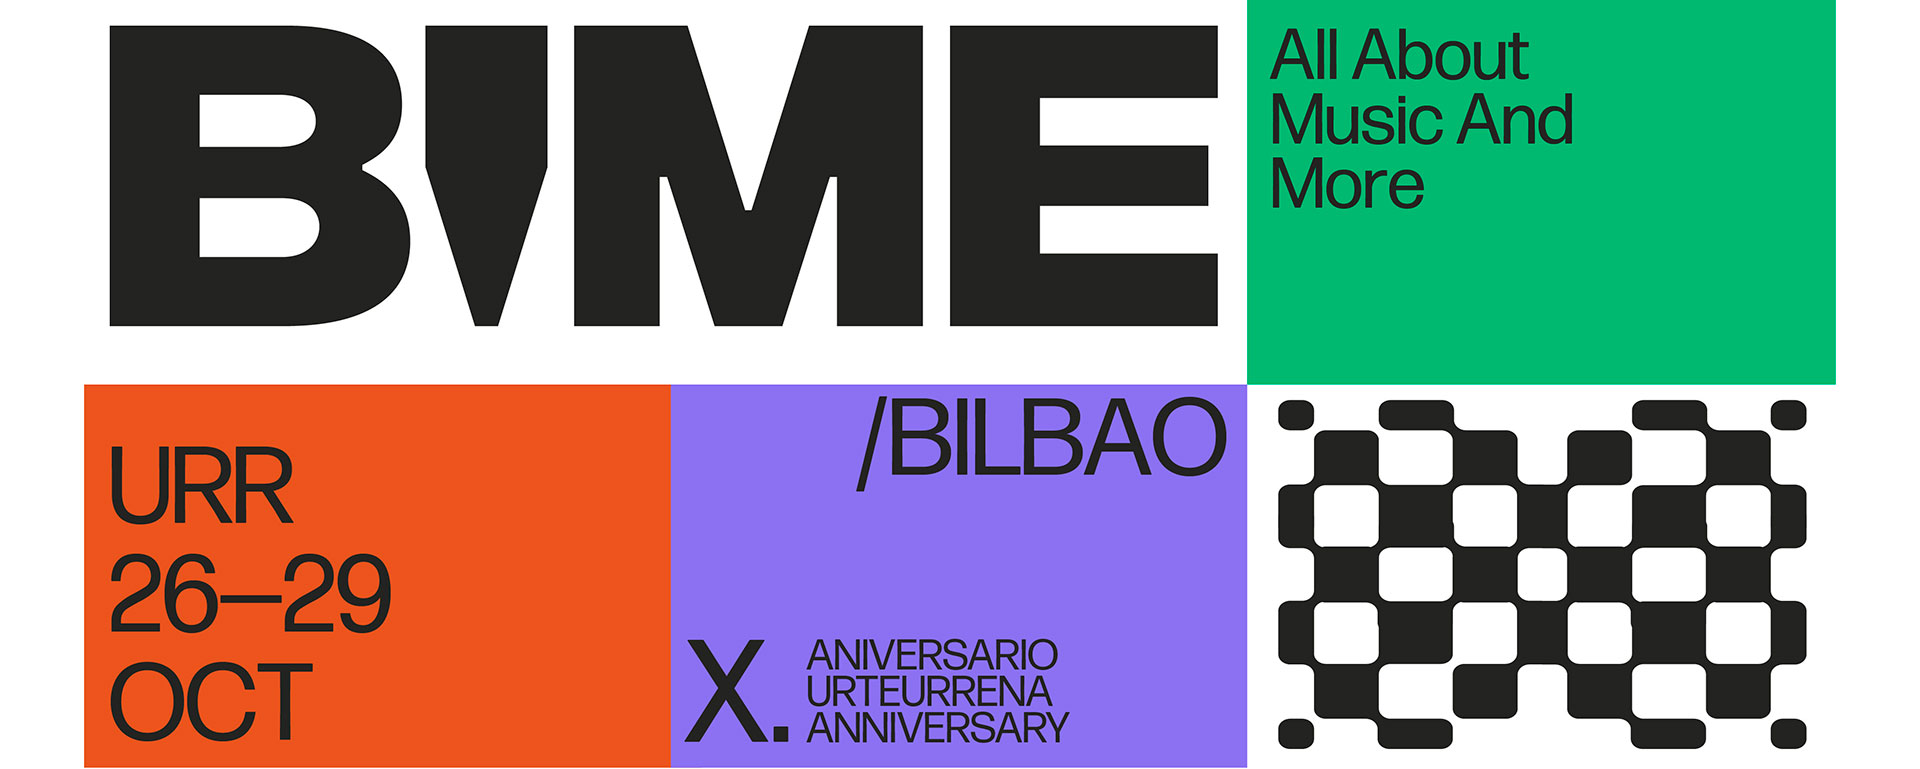 BIME celebrates its tenth anniversary with the Bilbao 2022 edition